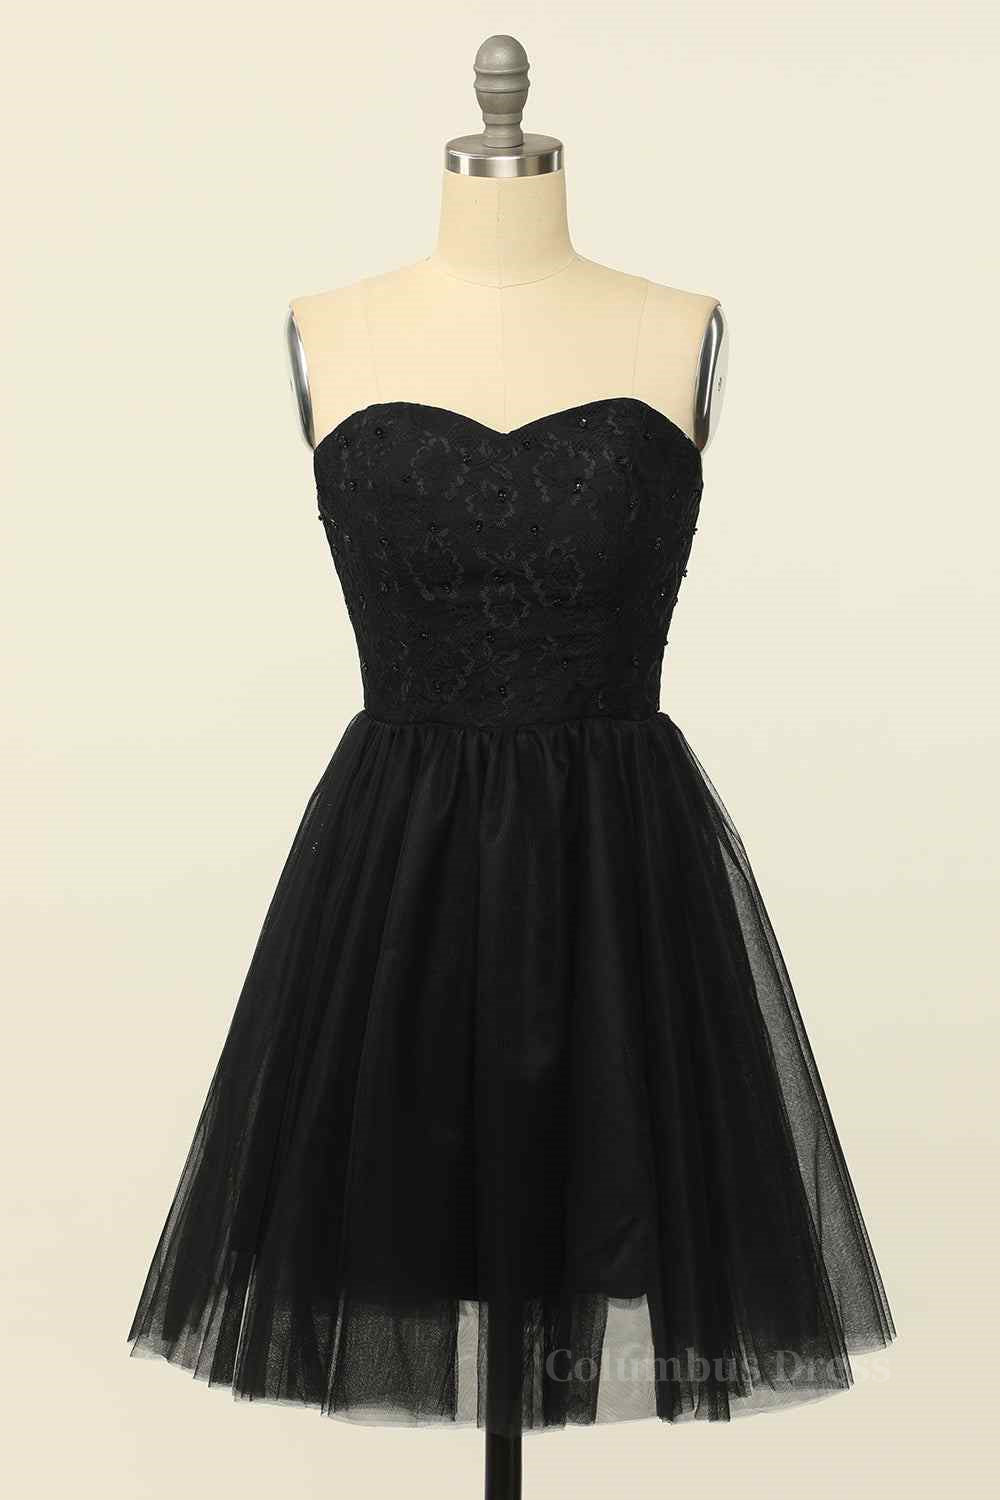 Black A-line Strapless Lace Beaded Lace-Up Back Mini Corset Homecoming Dress outfit, Party Dress Silk